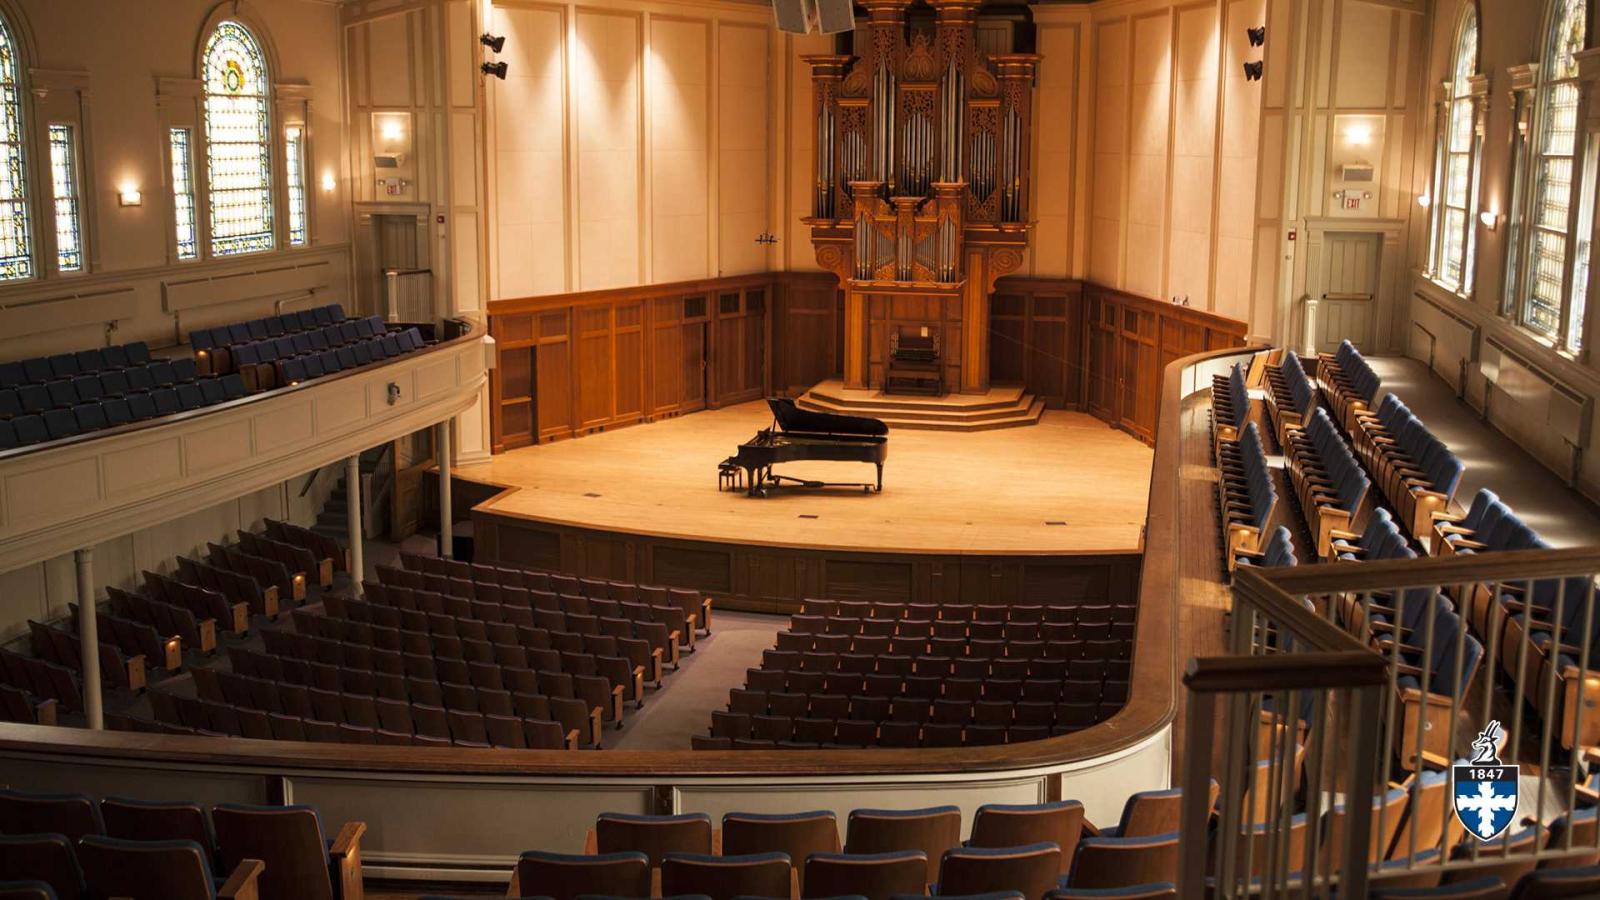 A grand piano stands center stage with organ in background inside an empty Memorial Chapel.